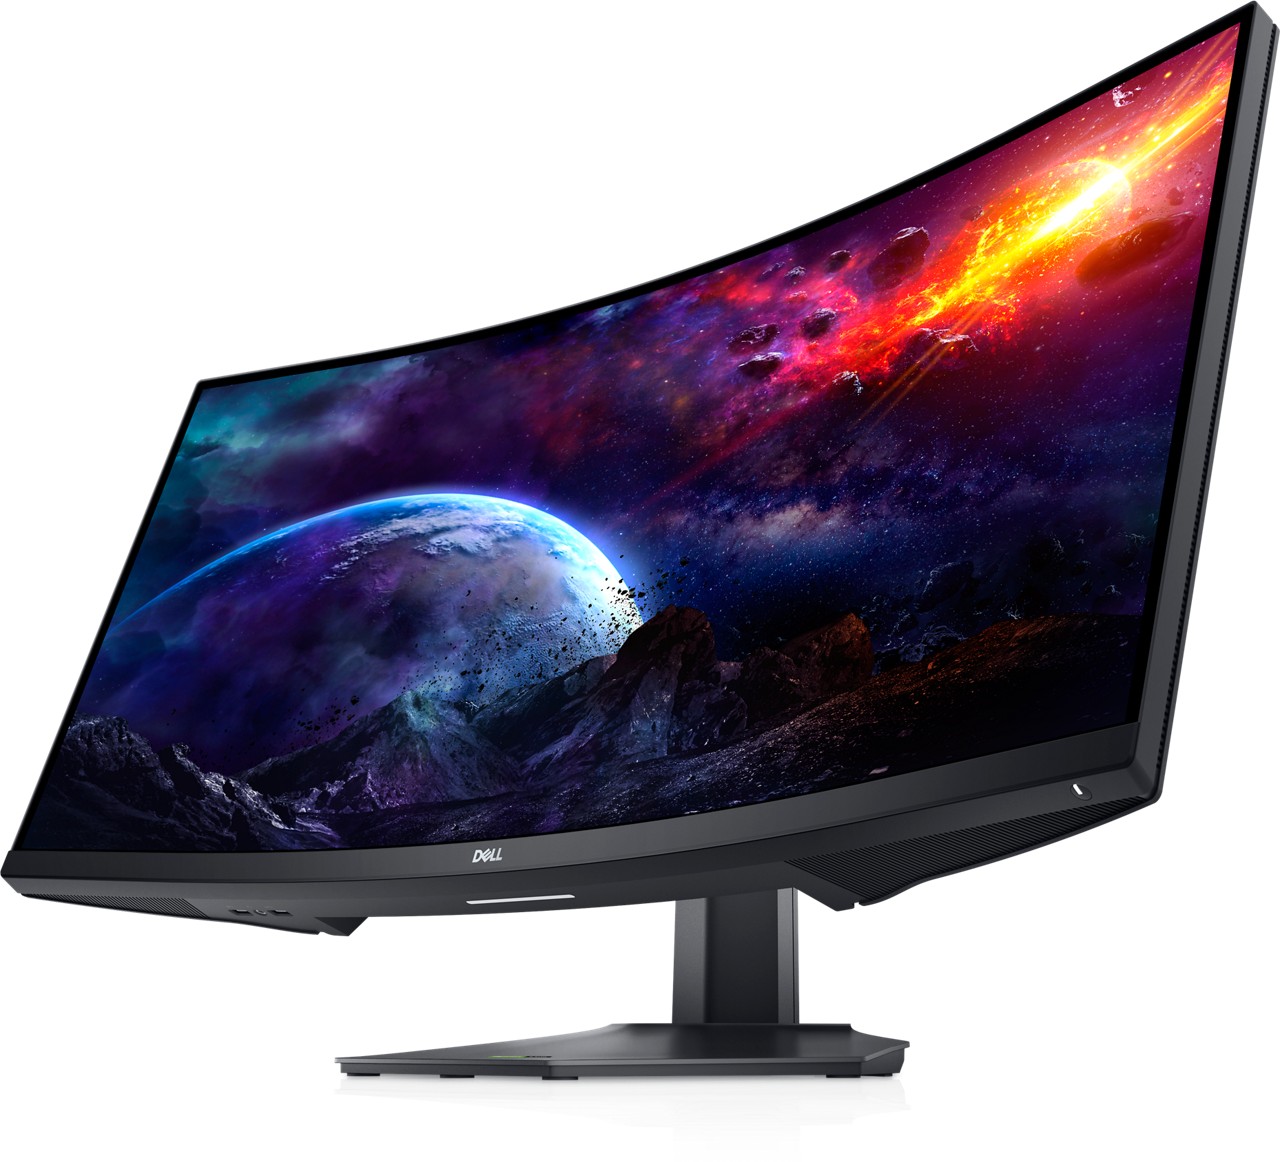 dell-preps-240hz-gaming-monitor-with-ips-panel